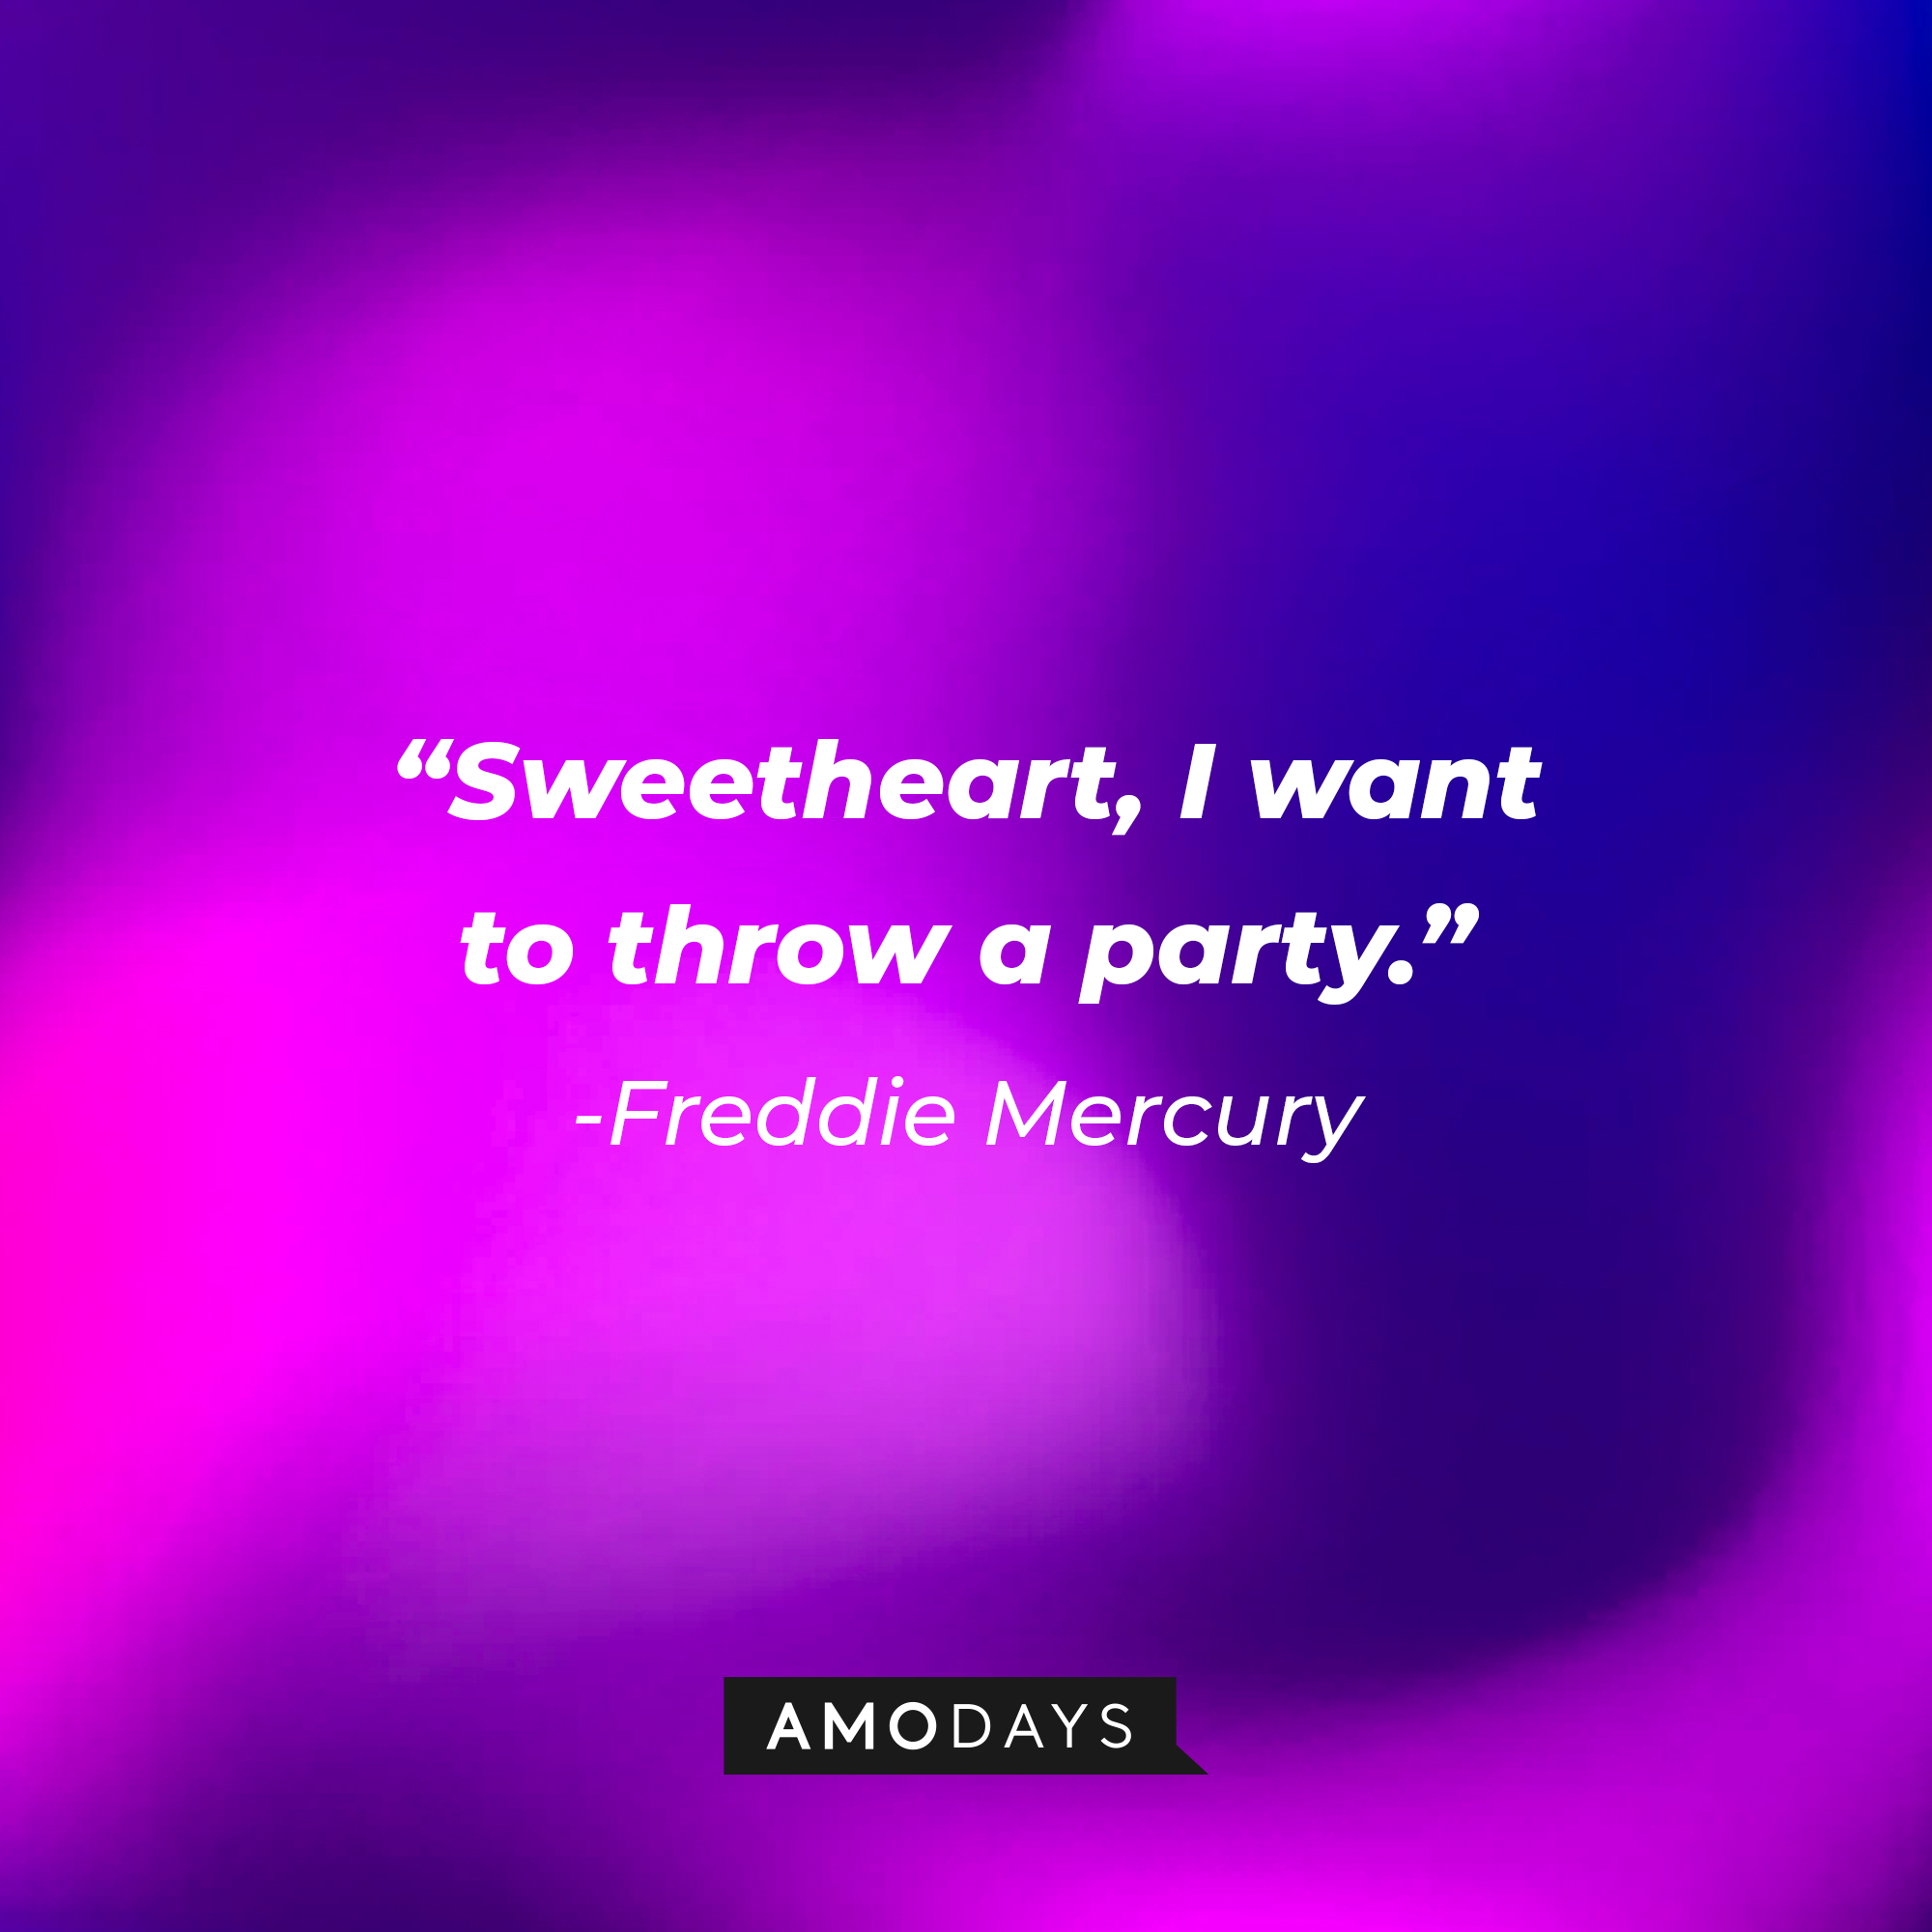 Freddie Mercury with his quote: "Sweetheart, I want to throw a party." | Source: Amodays